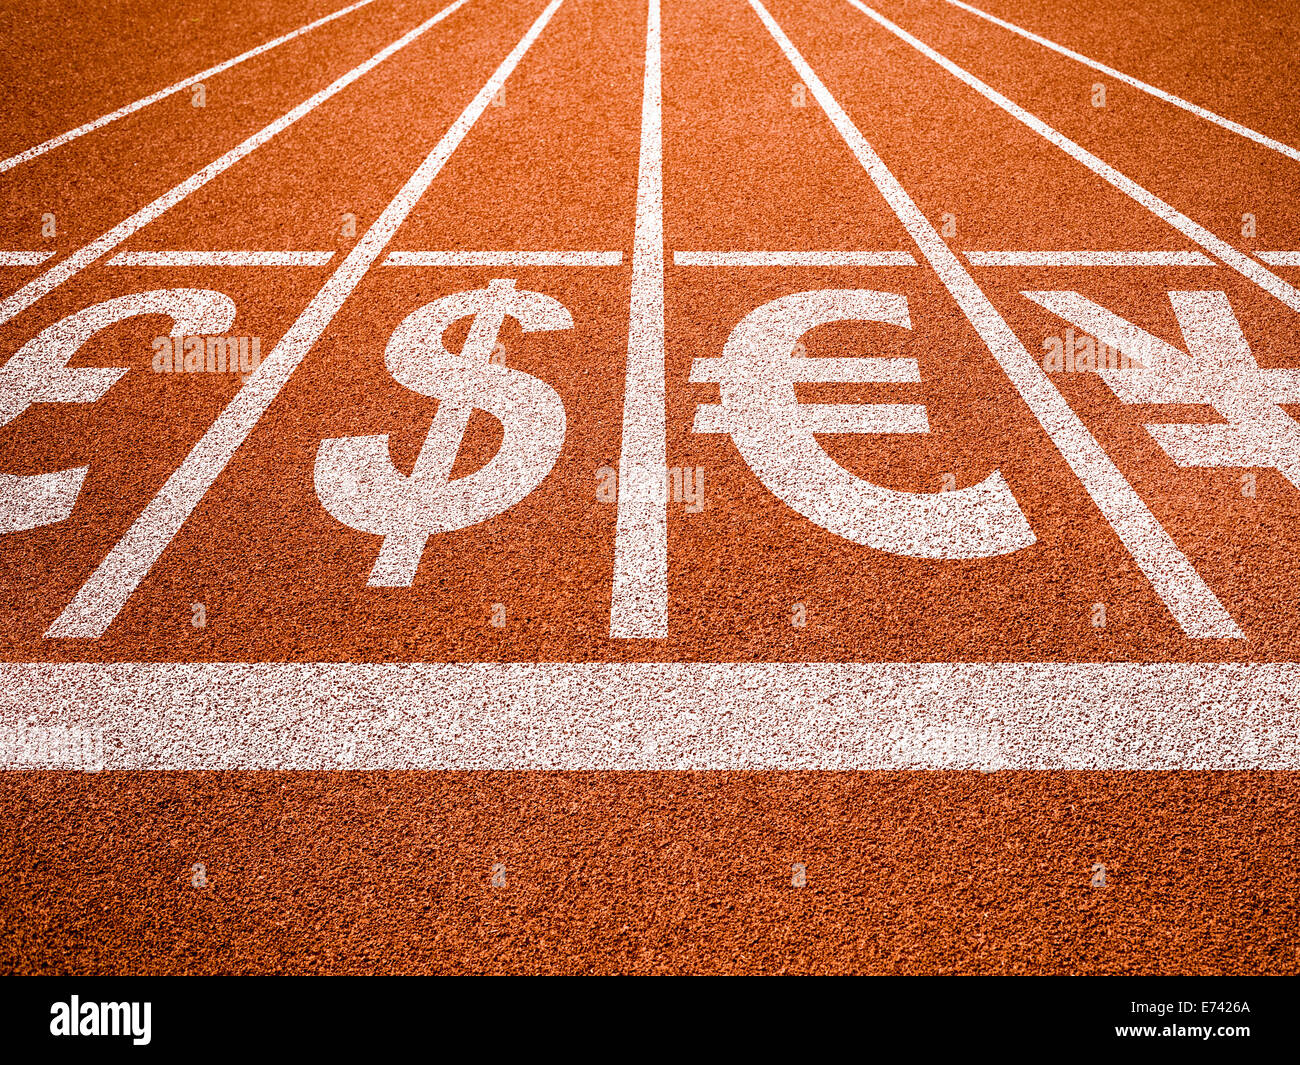 Currencies symbols on running trace start. Money concept. Stock Photo